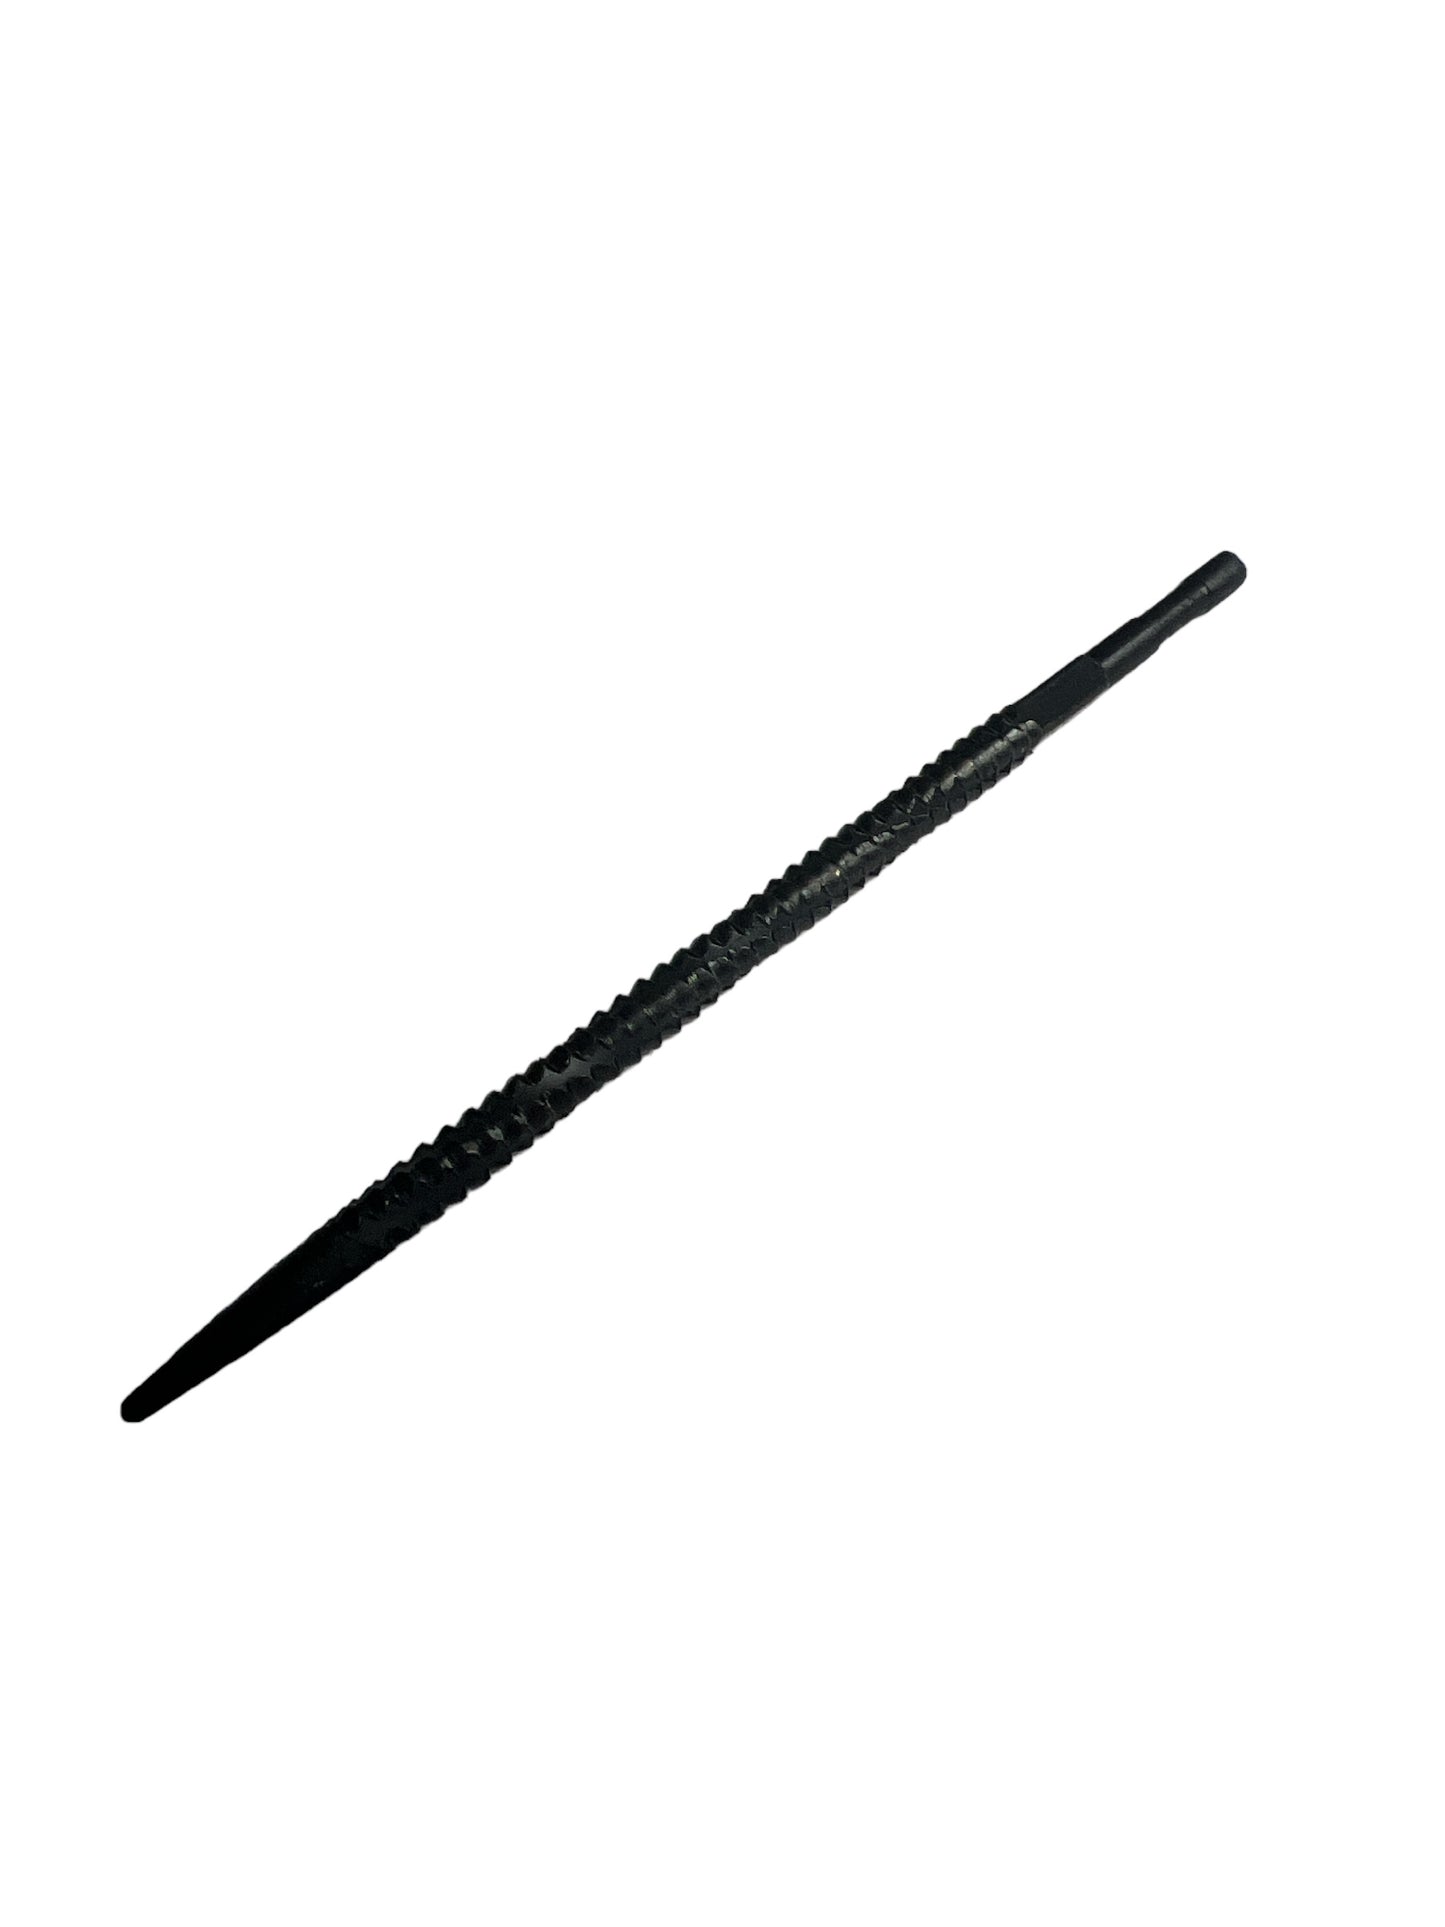 TRT-213R Replacement Thin Rasp Probe For TRT-213